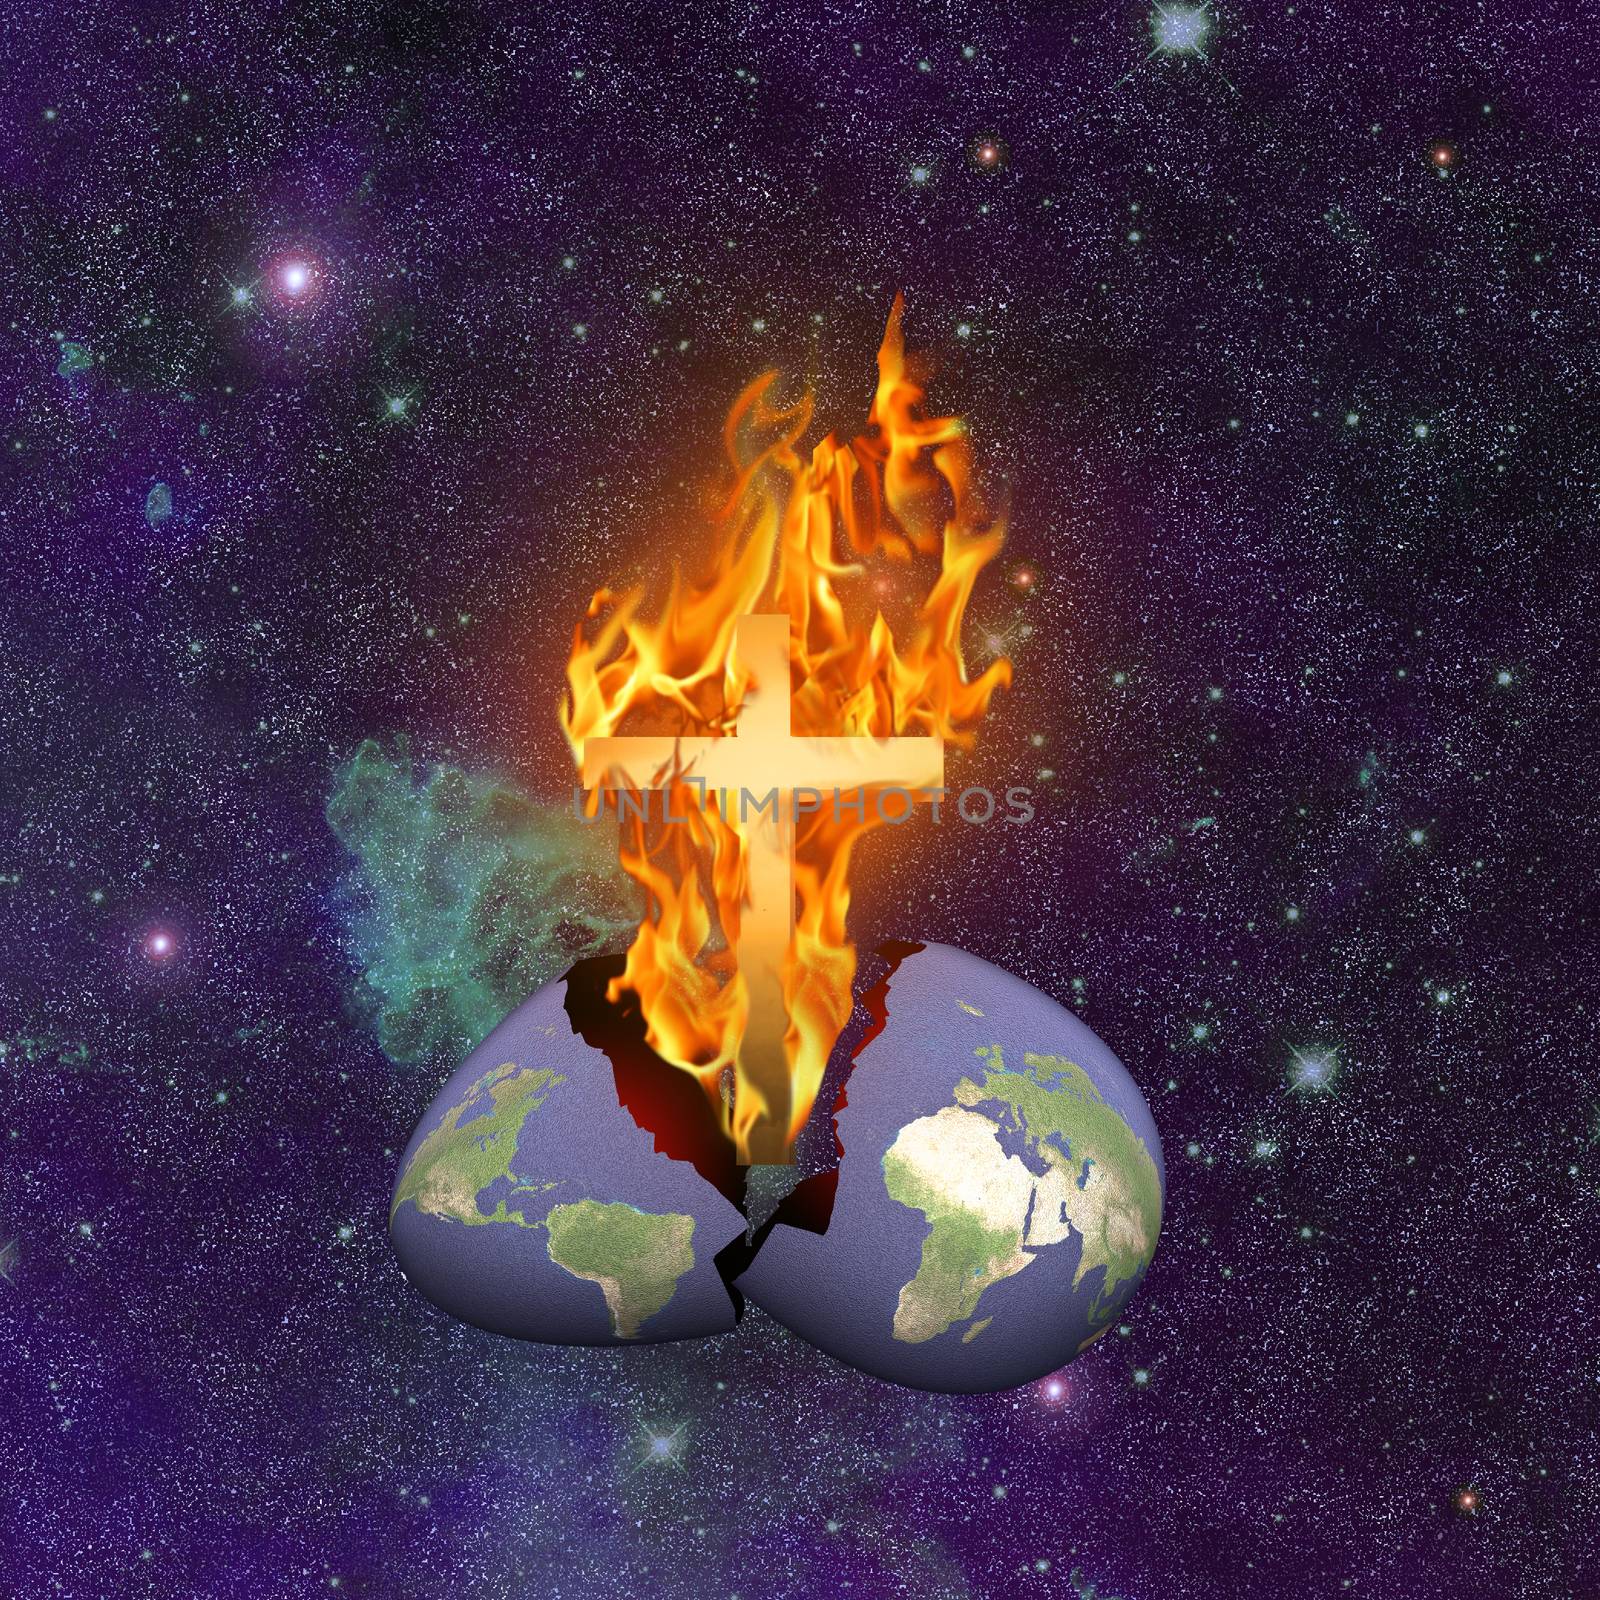 Christian cross in purifying fire hatched from planet Earth